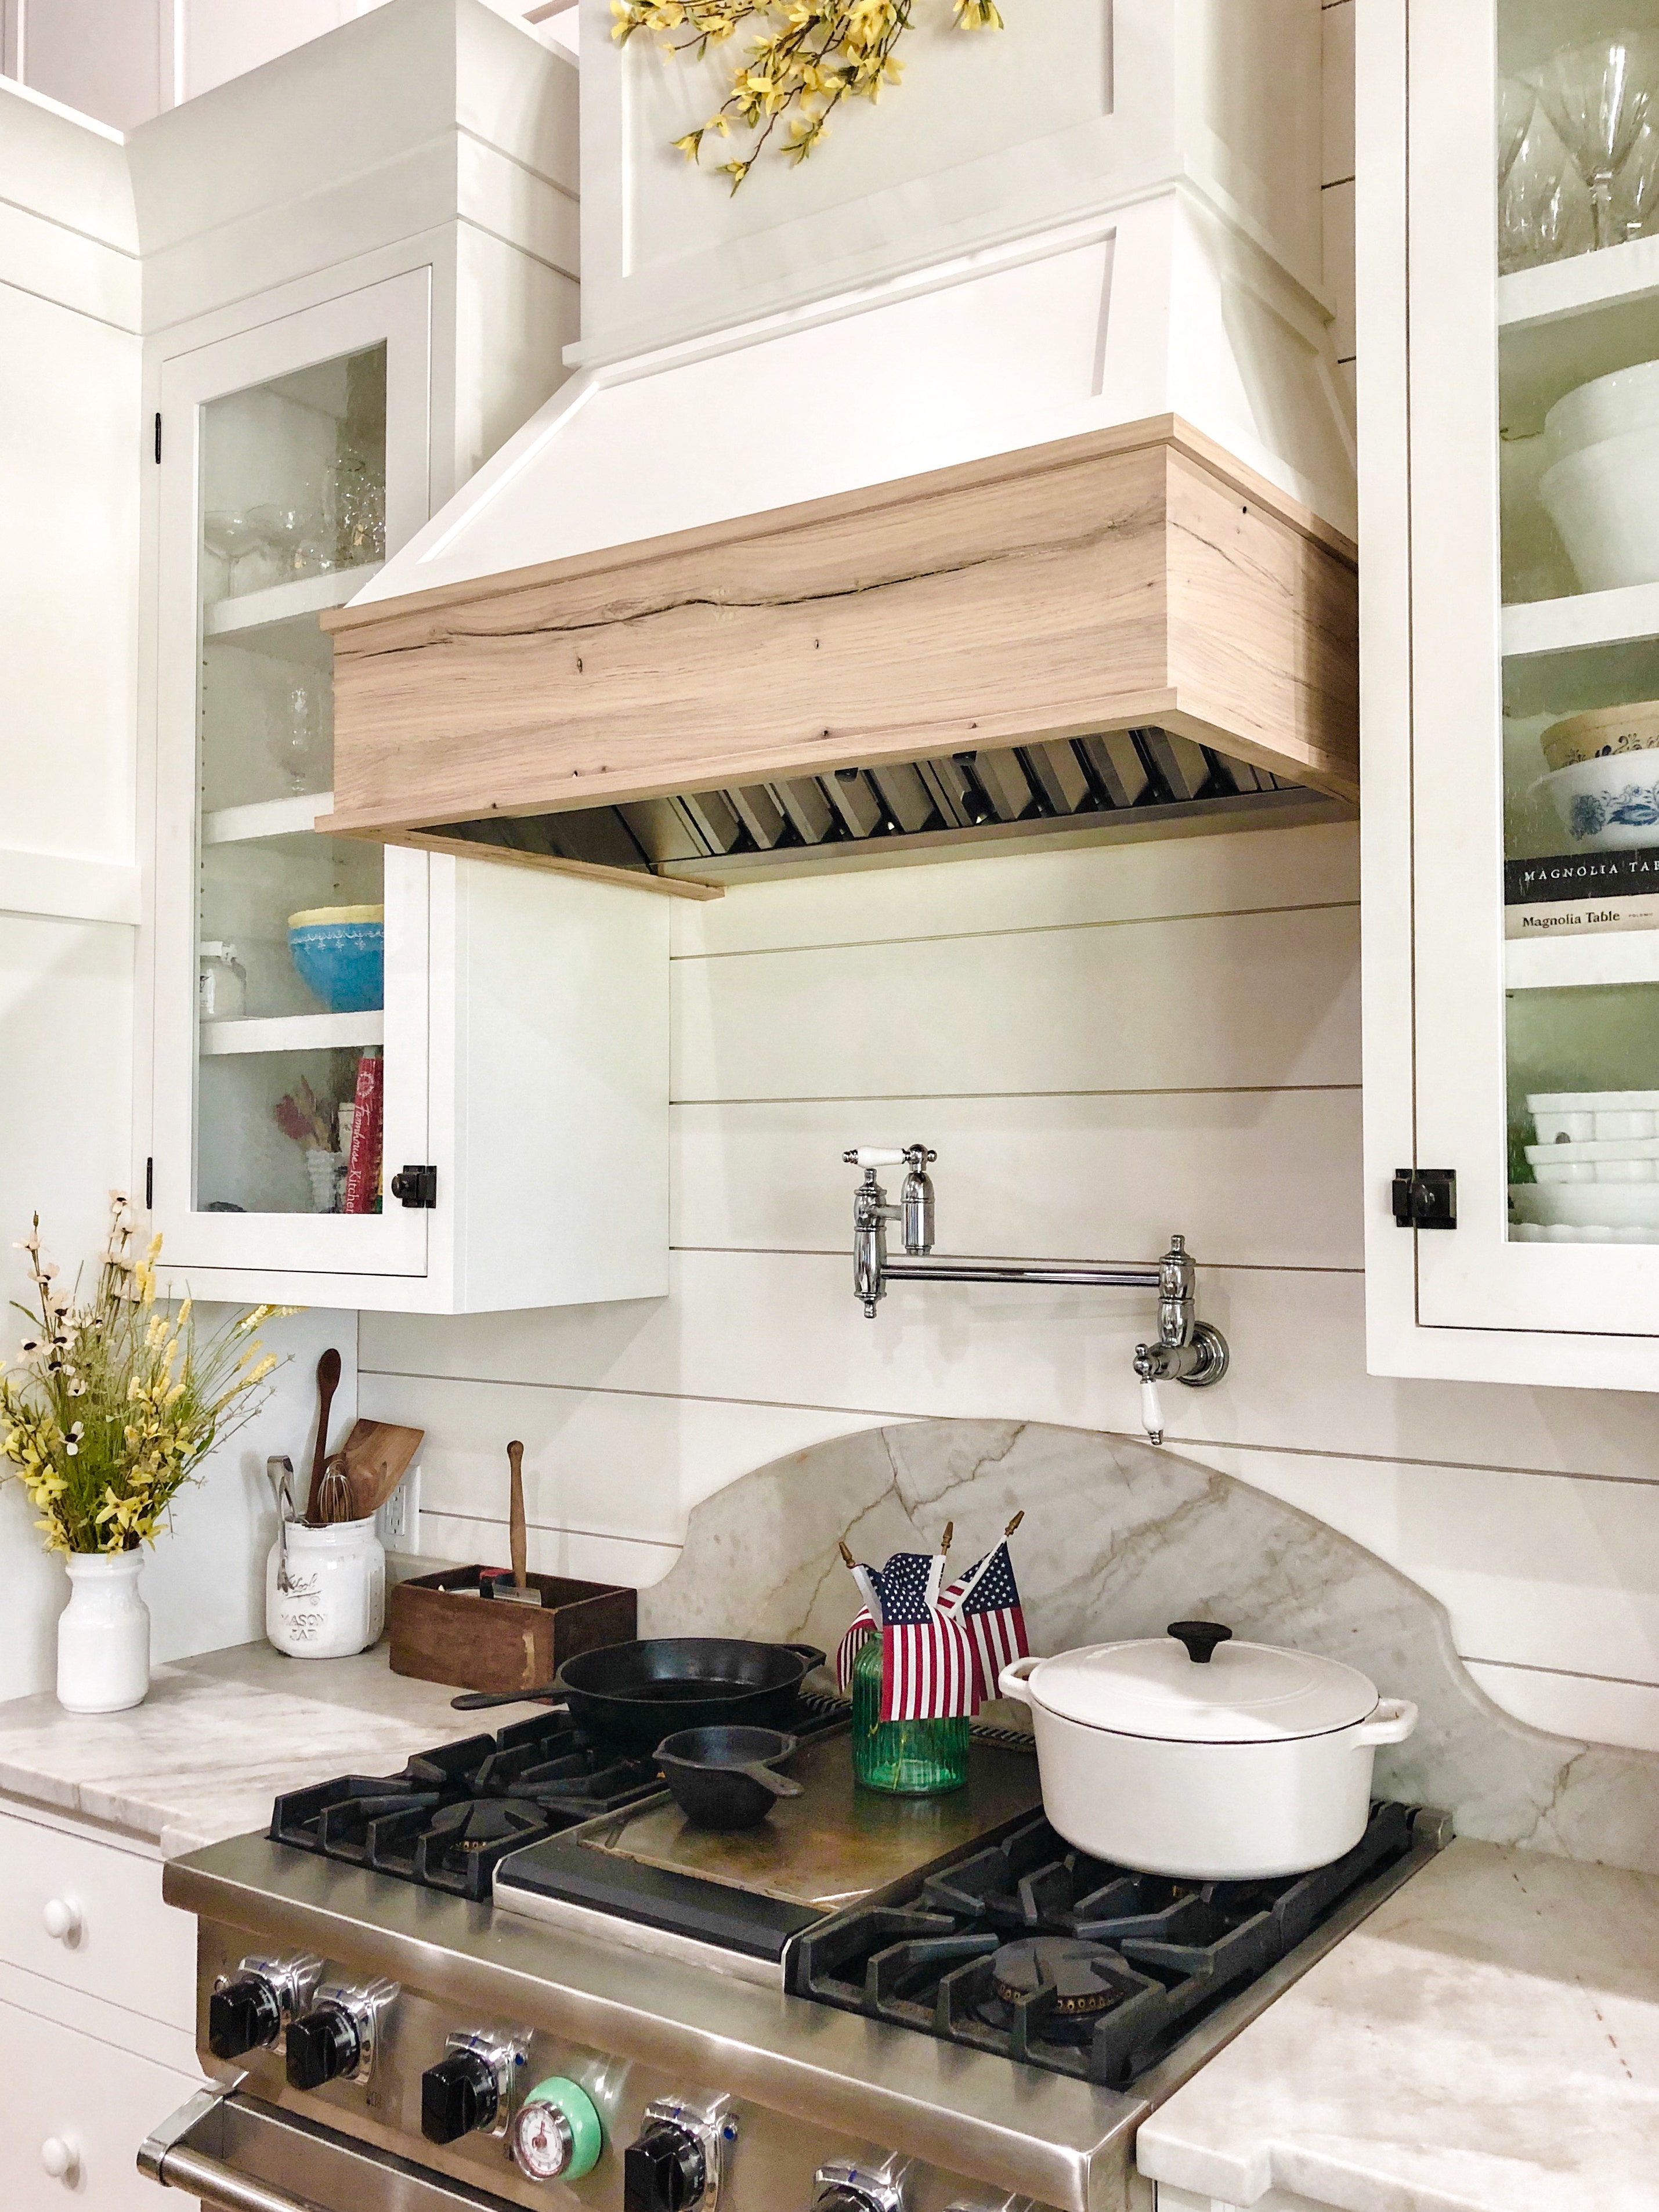 Kitchen Range Hood Ideas: The Ultimate Guide